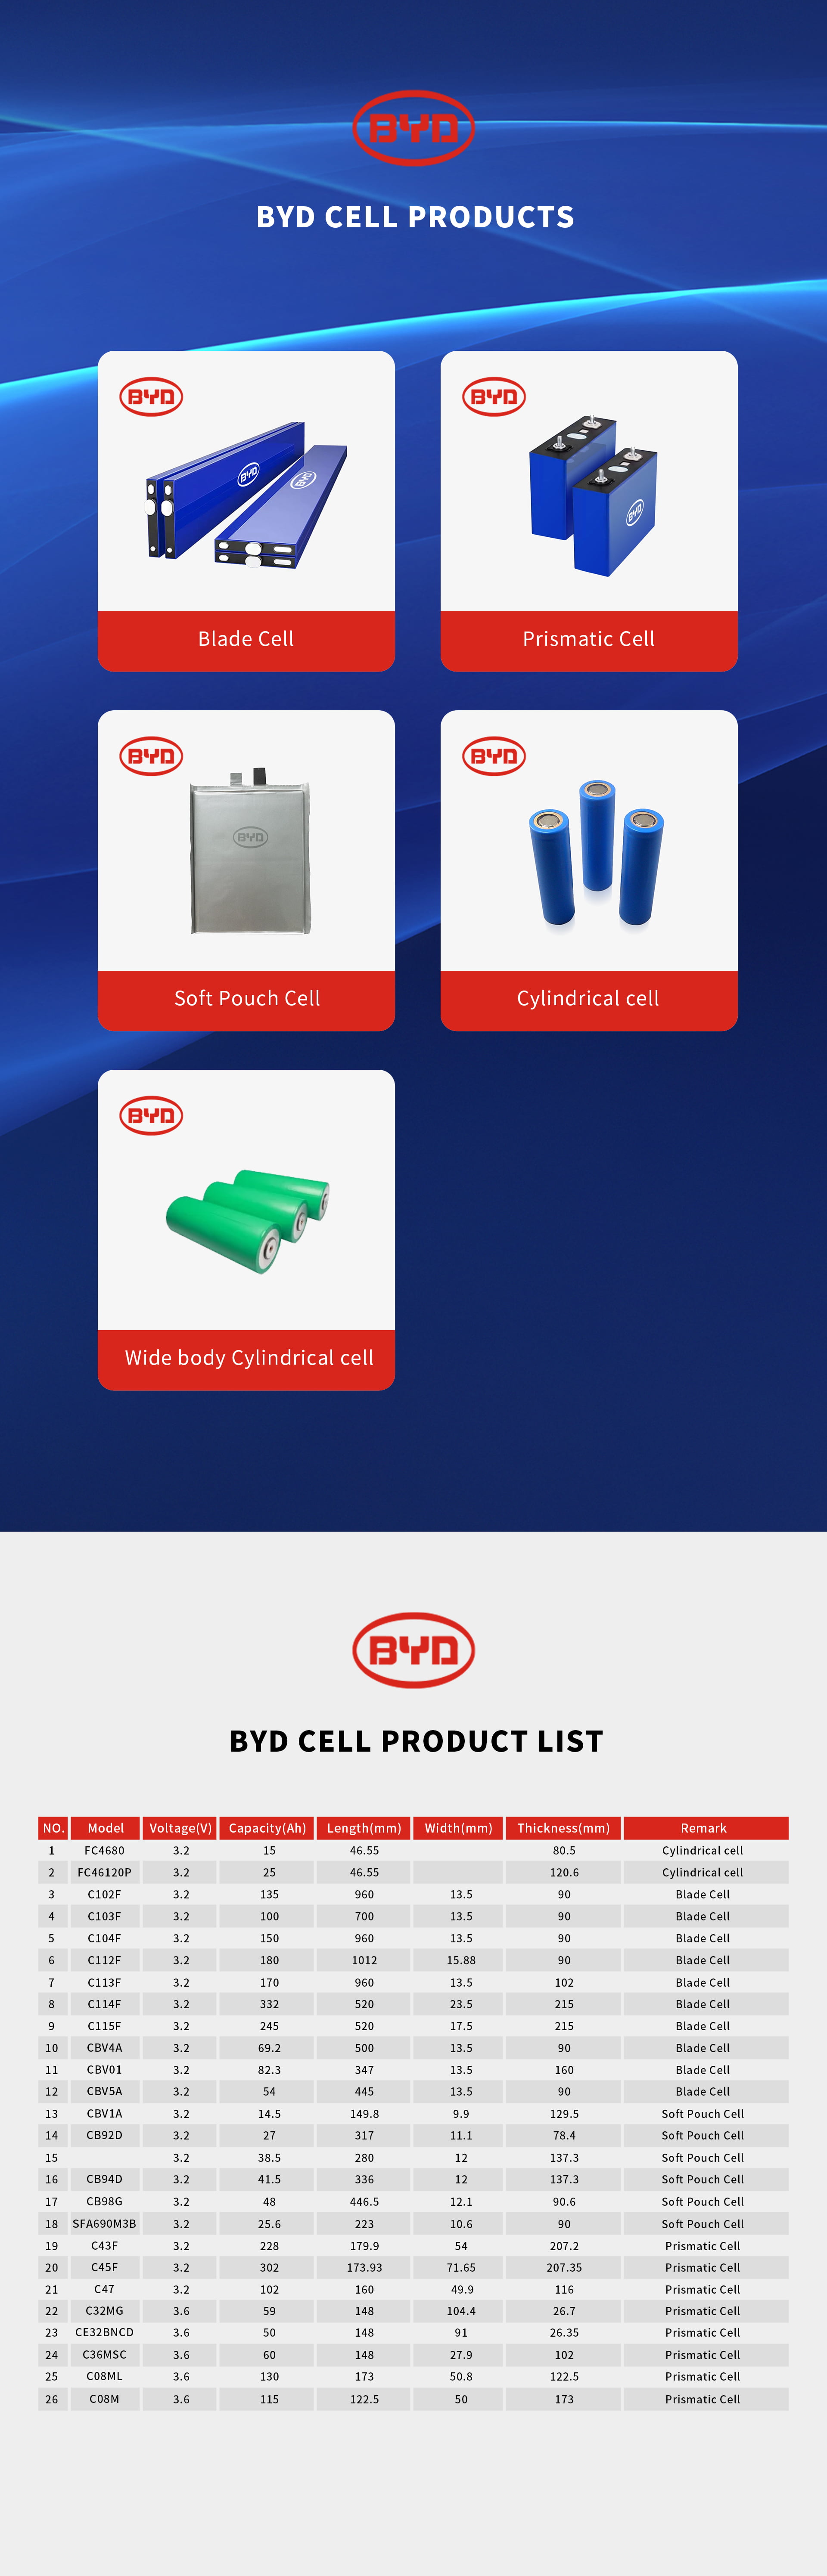 All BYD products